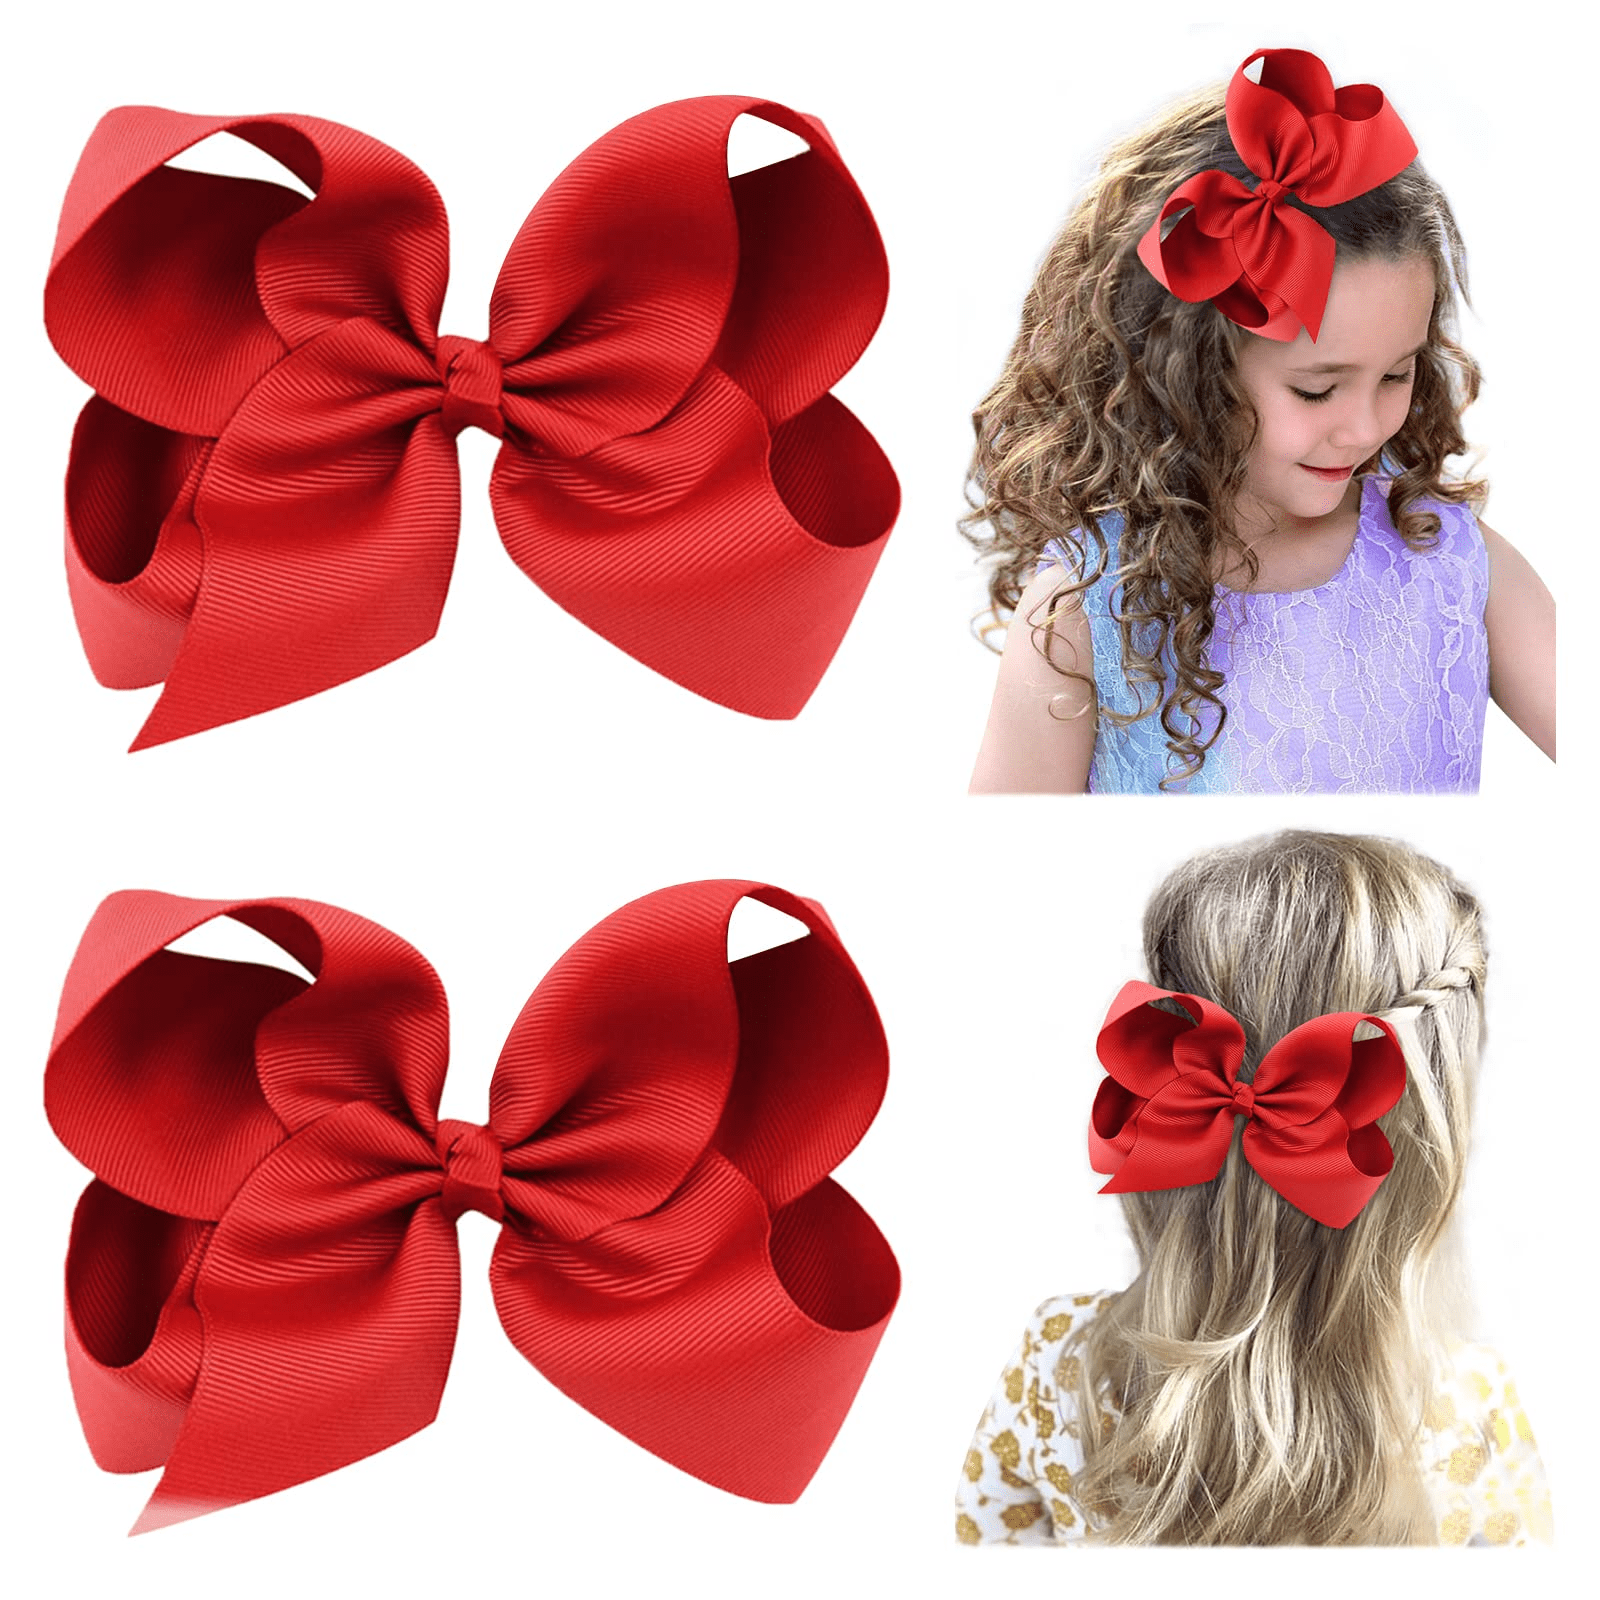 Handmade Extra Large Red Hair Bow, Red Hair Bow Texas Size 5 inch / Alligator Clip Only